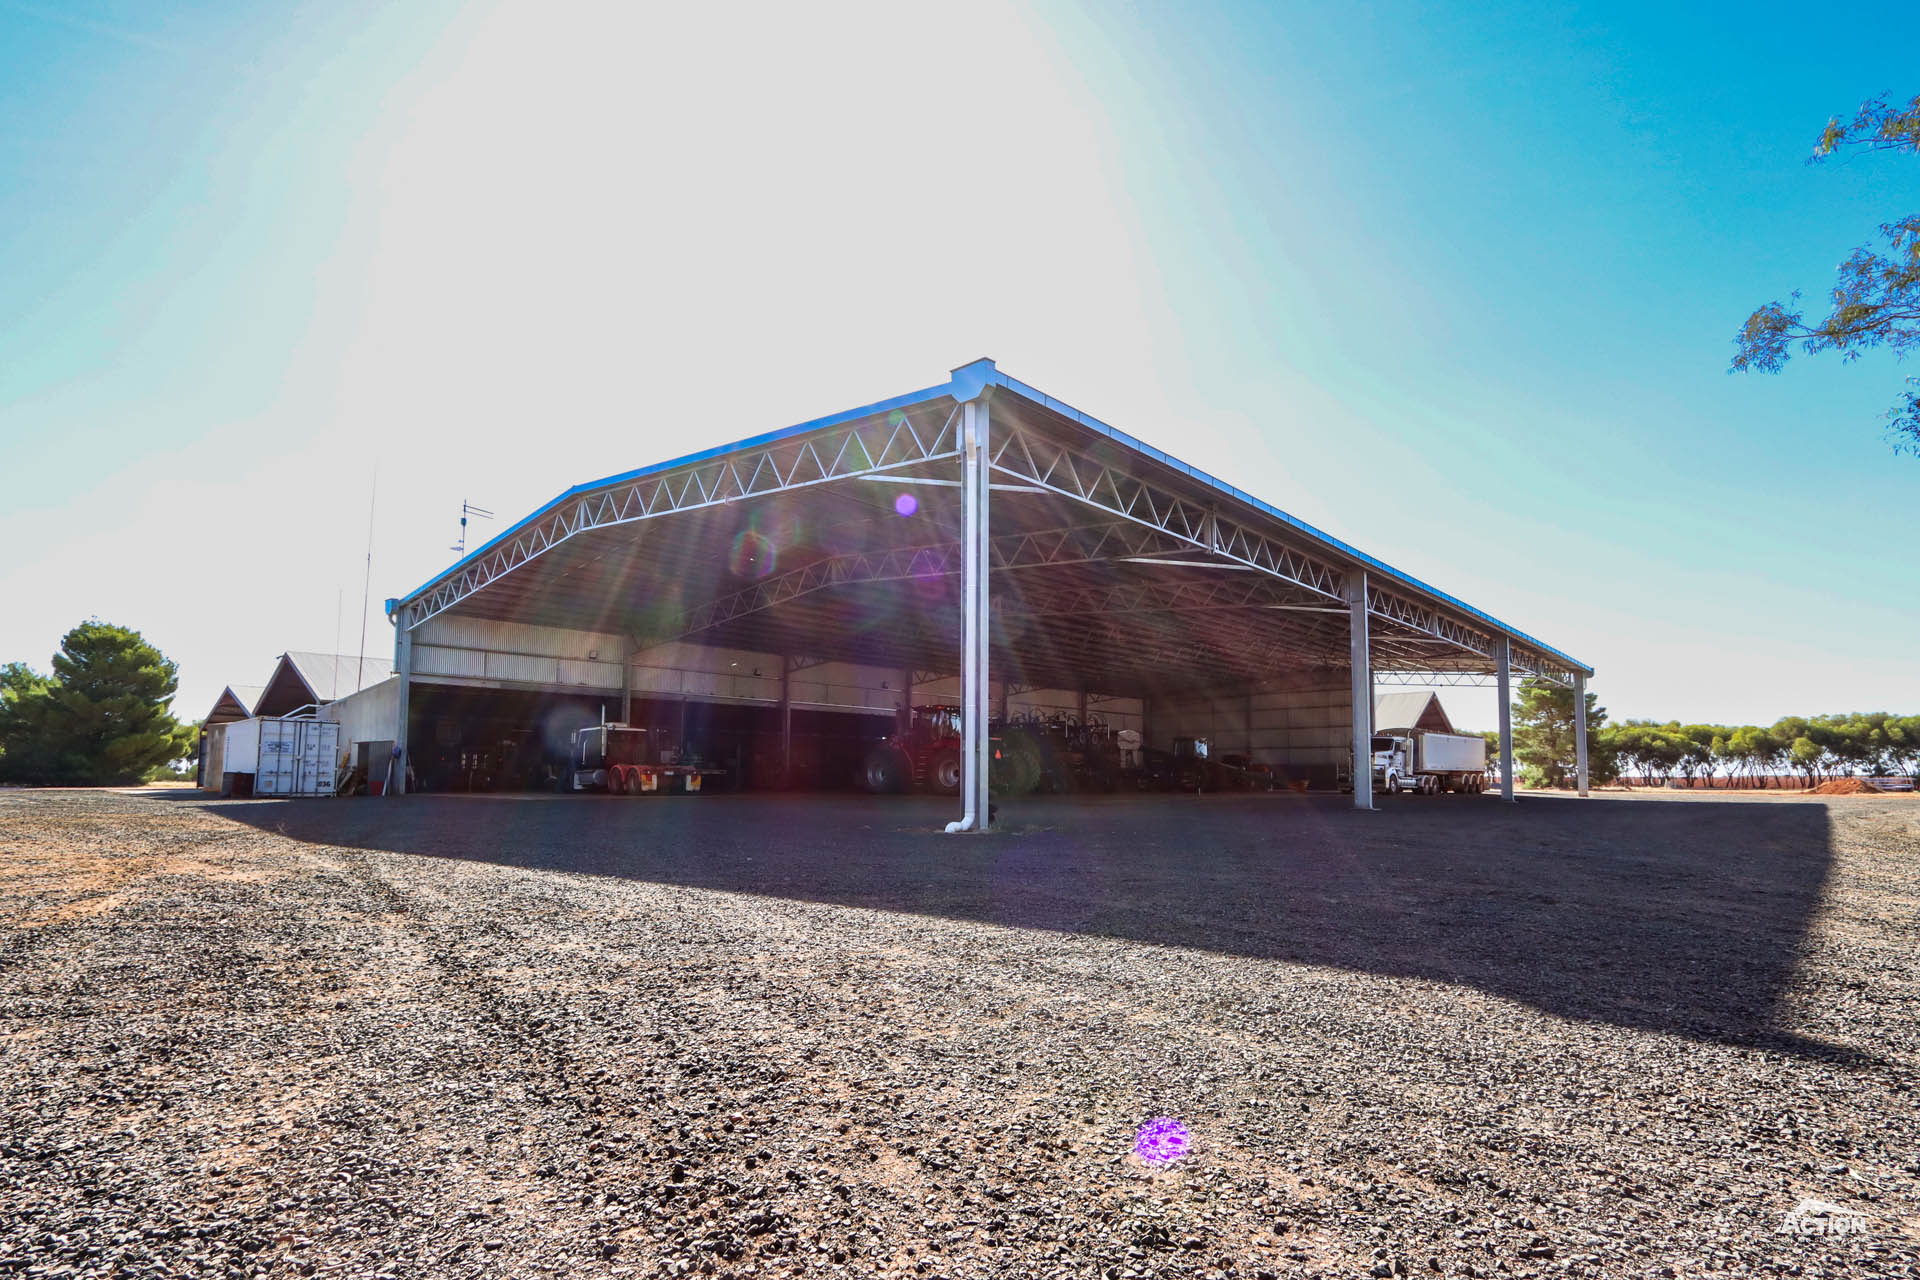 You are currently viewing 54m x 30m x 7.5m machinery shed